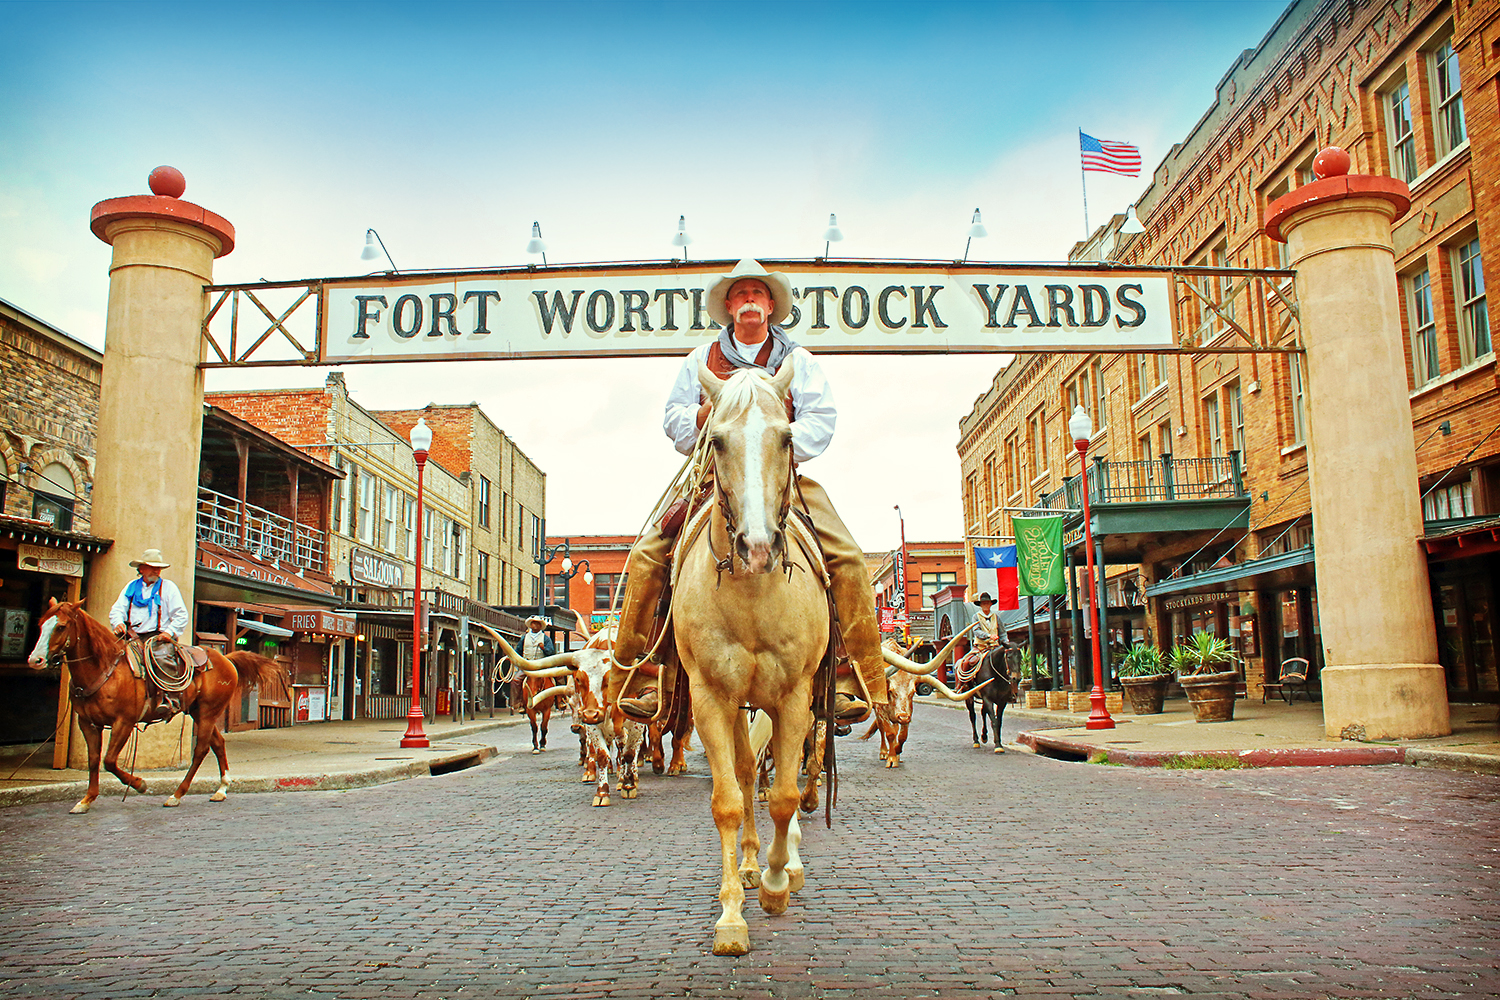 [WEBINAR] Discover The Modern West In Fort Worth, Texas The Unexpected City!